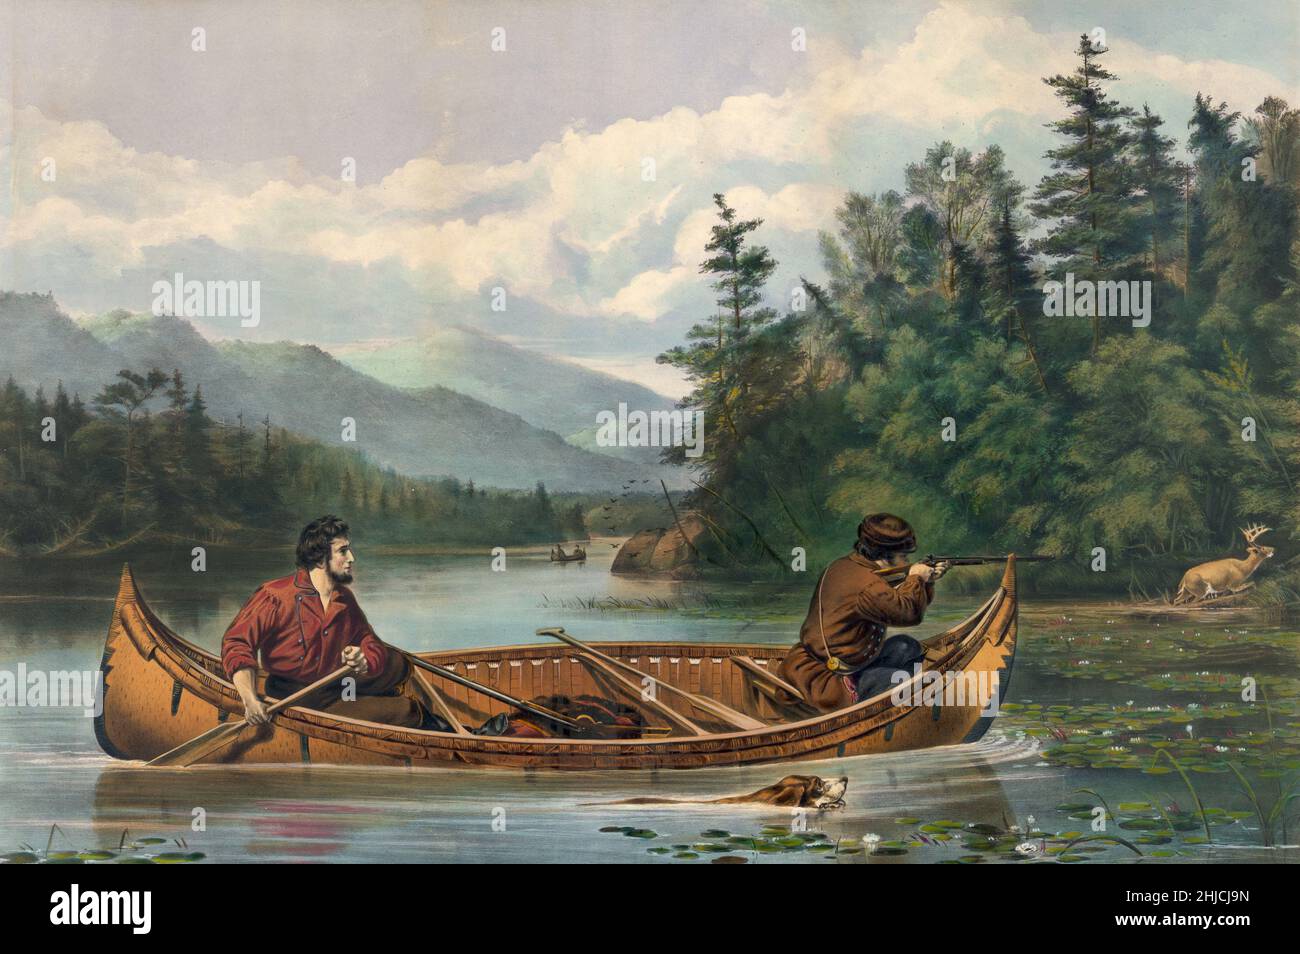 A scene of frontier-era Americans deer hunting from a canoe. 'A good Chance' painted by Arthur Fitzwilliam Tait; lithograph by Currier & Ives, 1863. Stock Photo